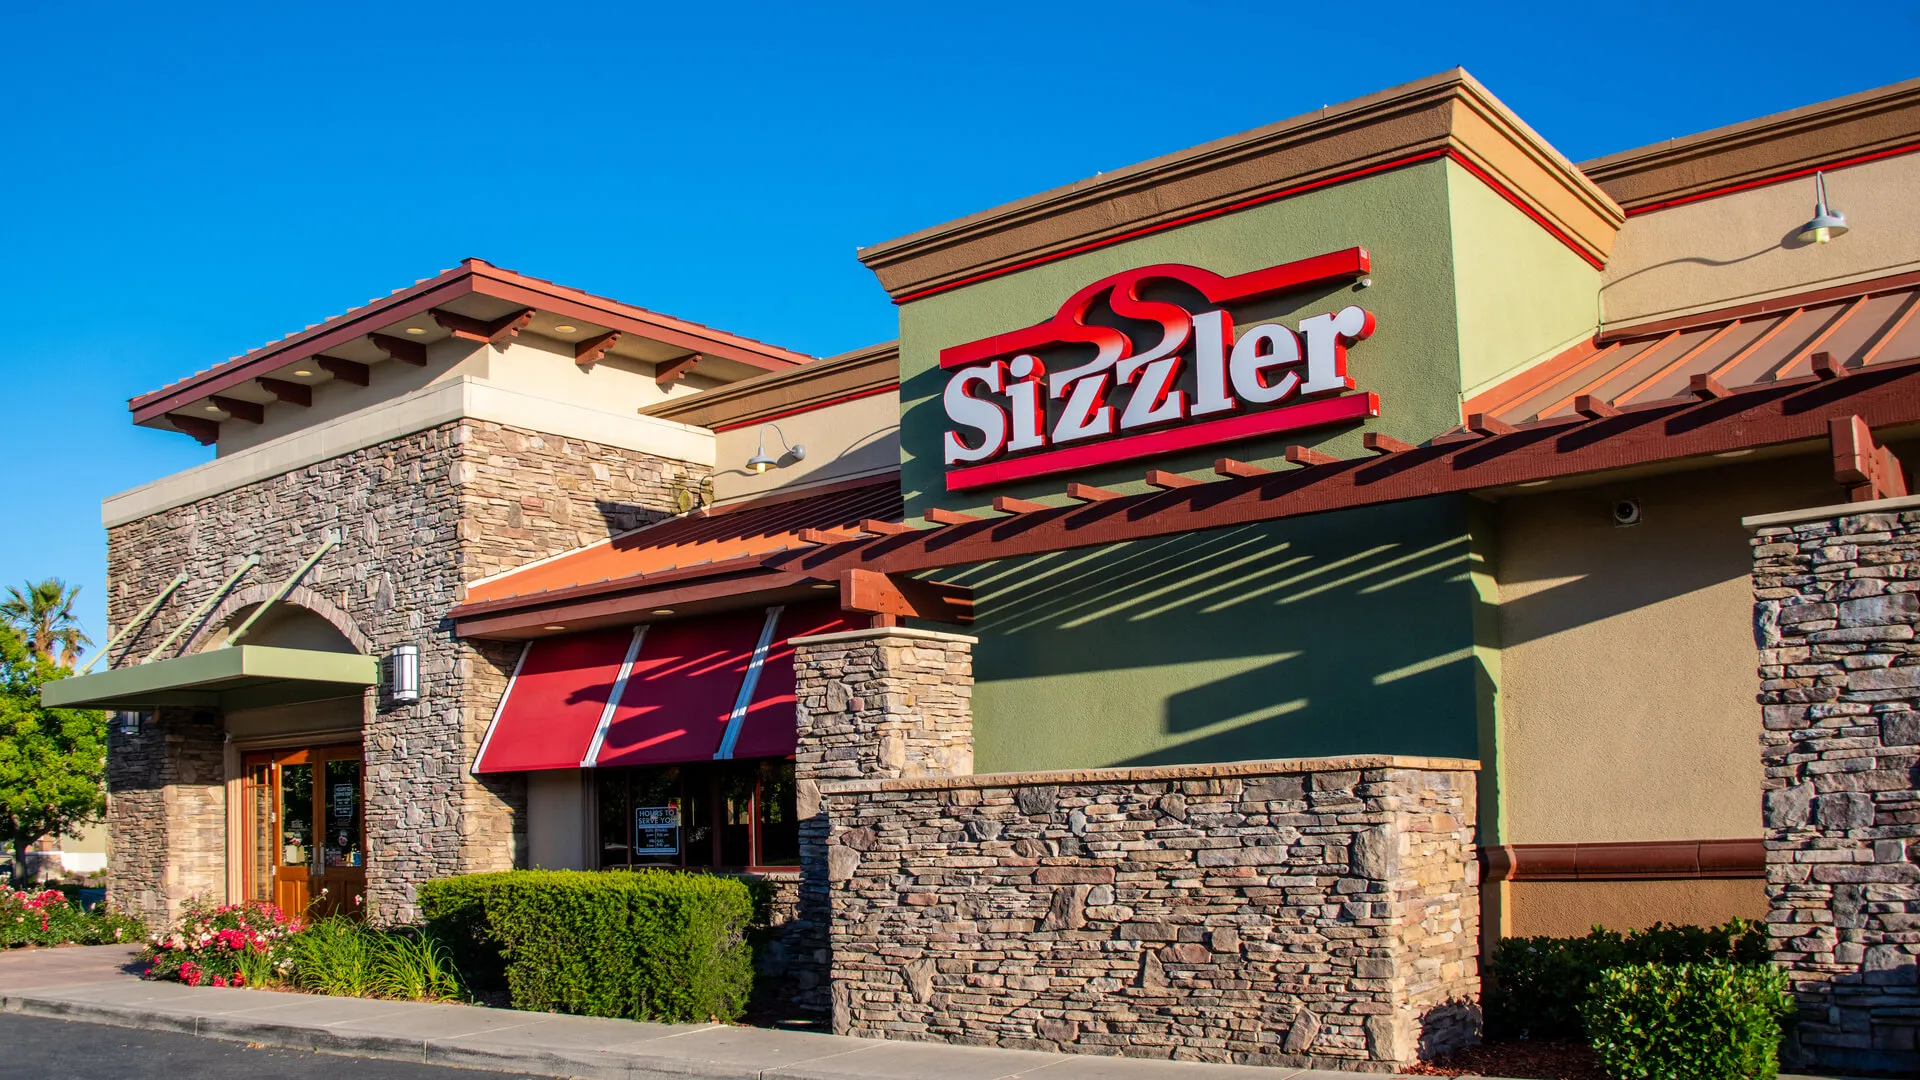 Sacramento, CA/USA 06/06/2019 Sizzler's american steak house and salad buffet front building sign and logo